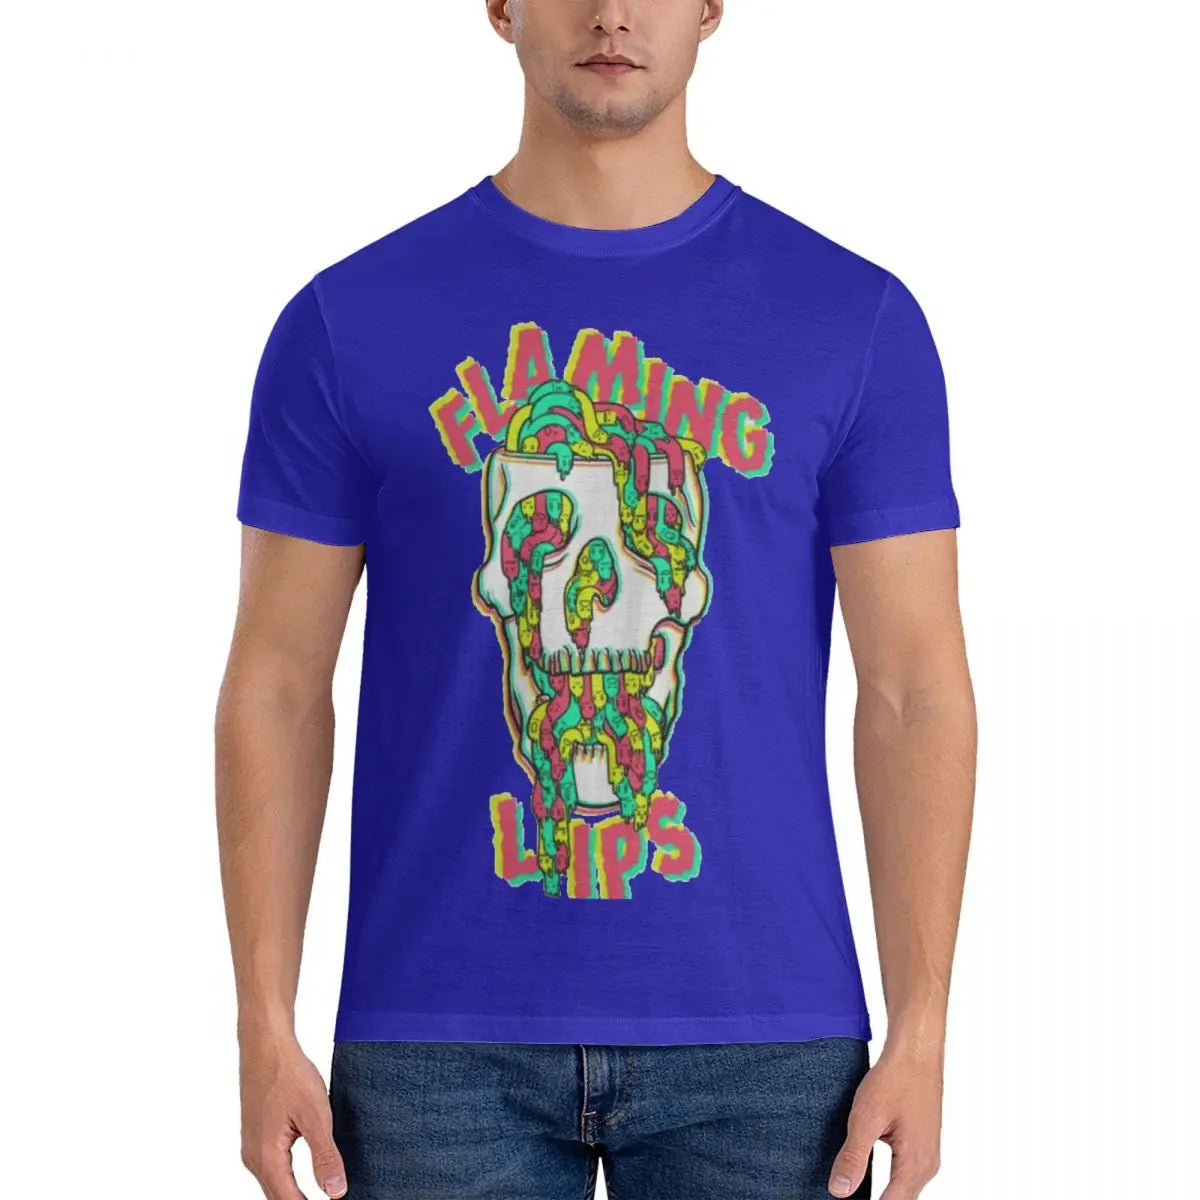 Flaming Lips Gummy Worms T-Shirt